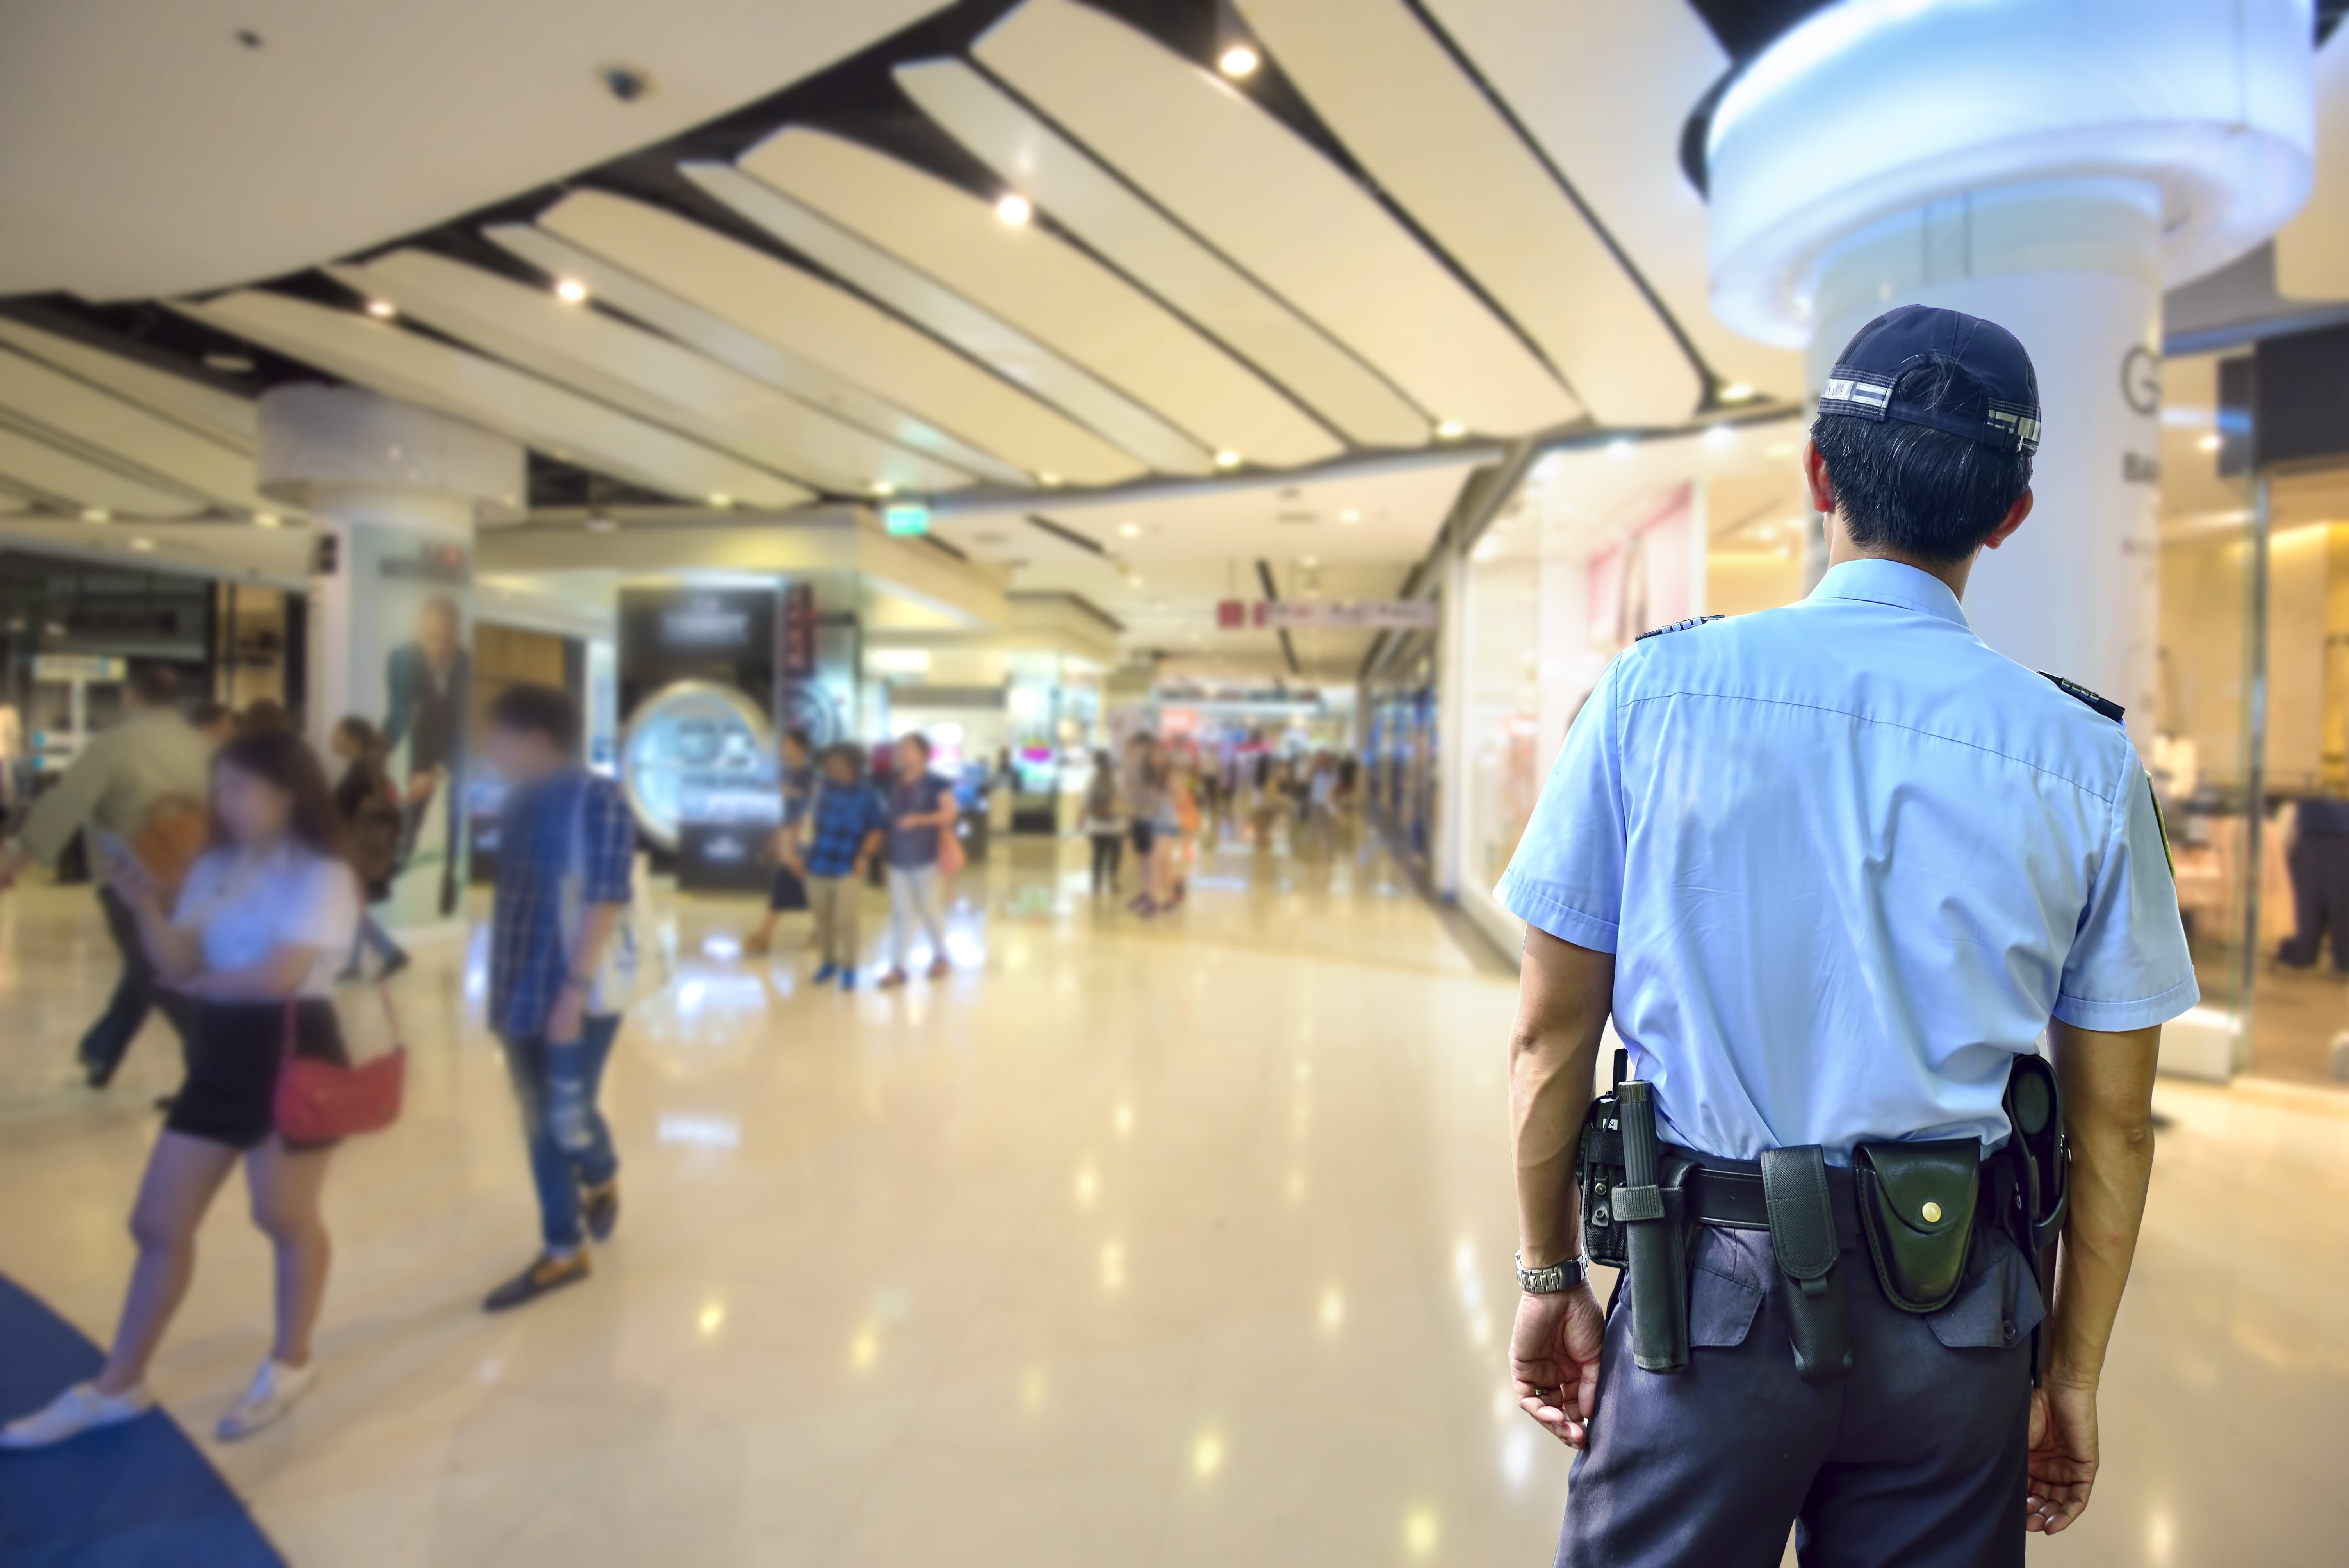 What Are The Main Responsibilities Of A Mall Security Officer